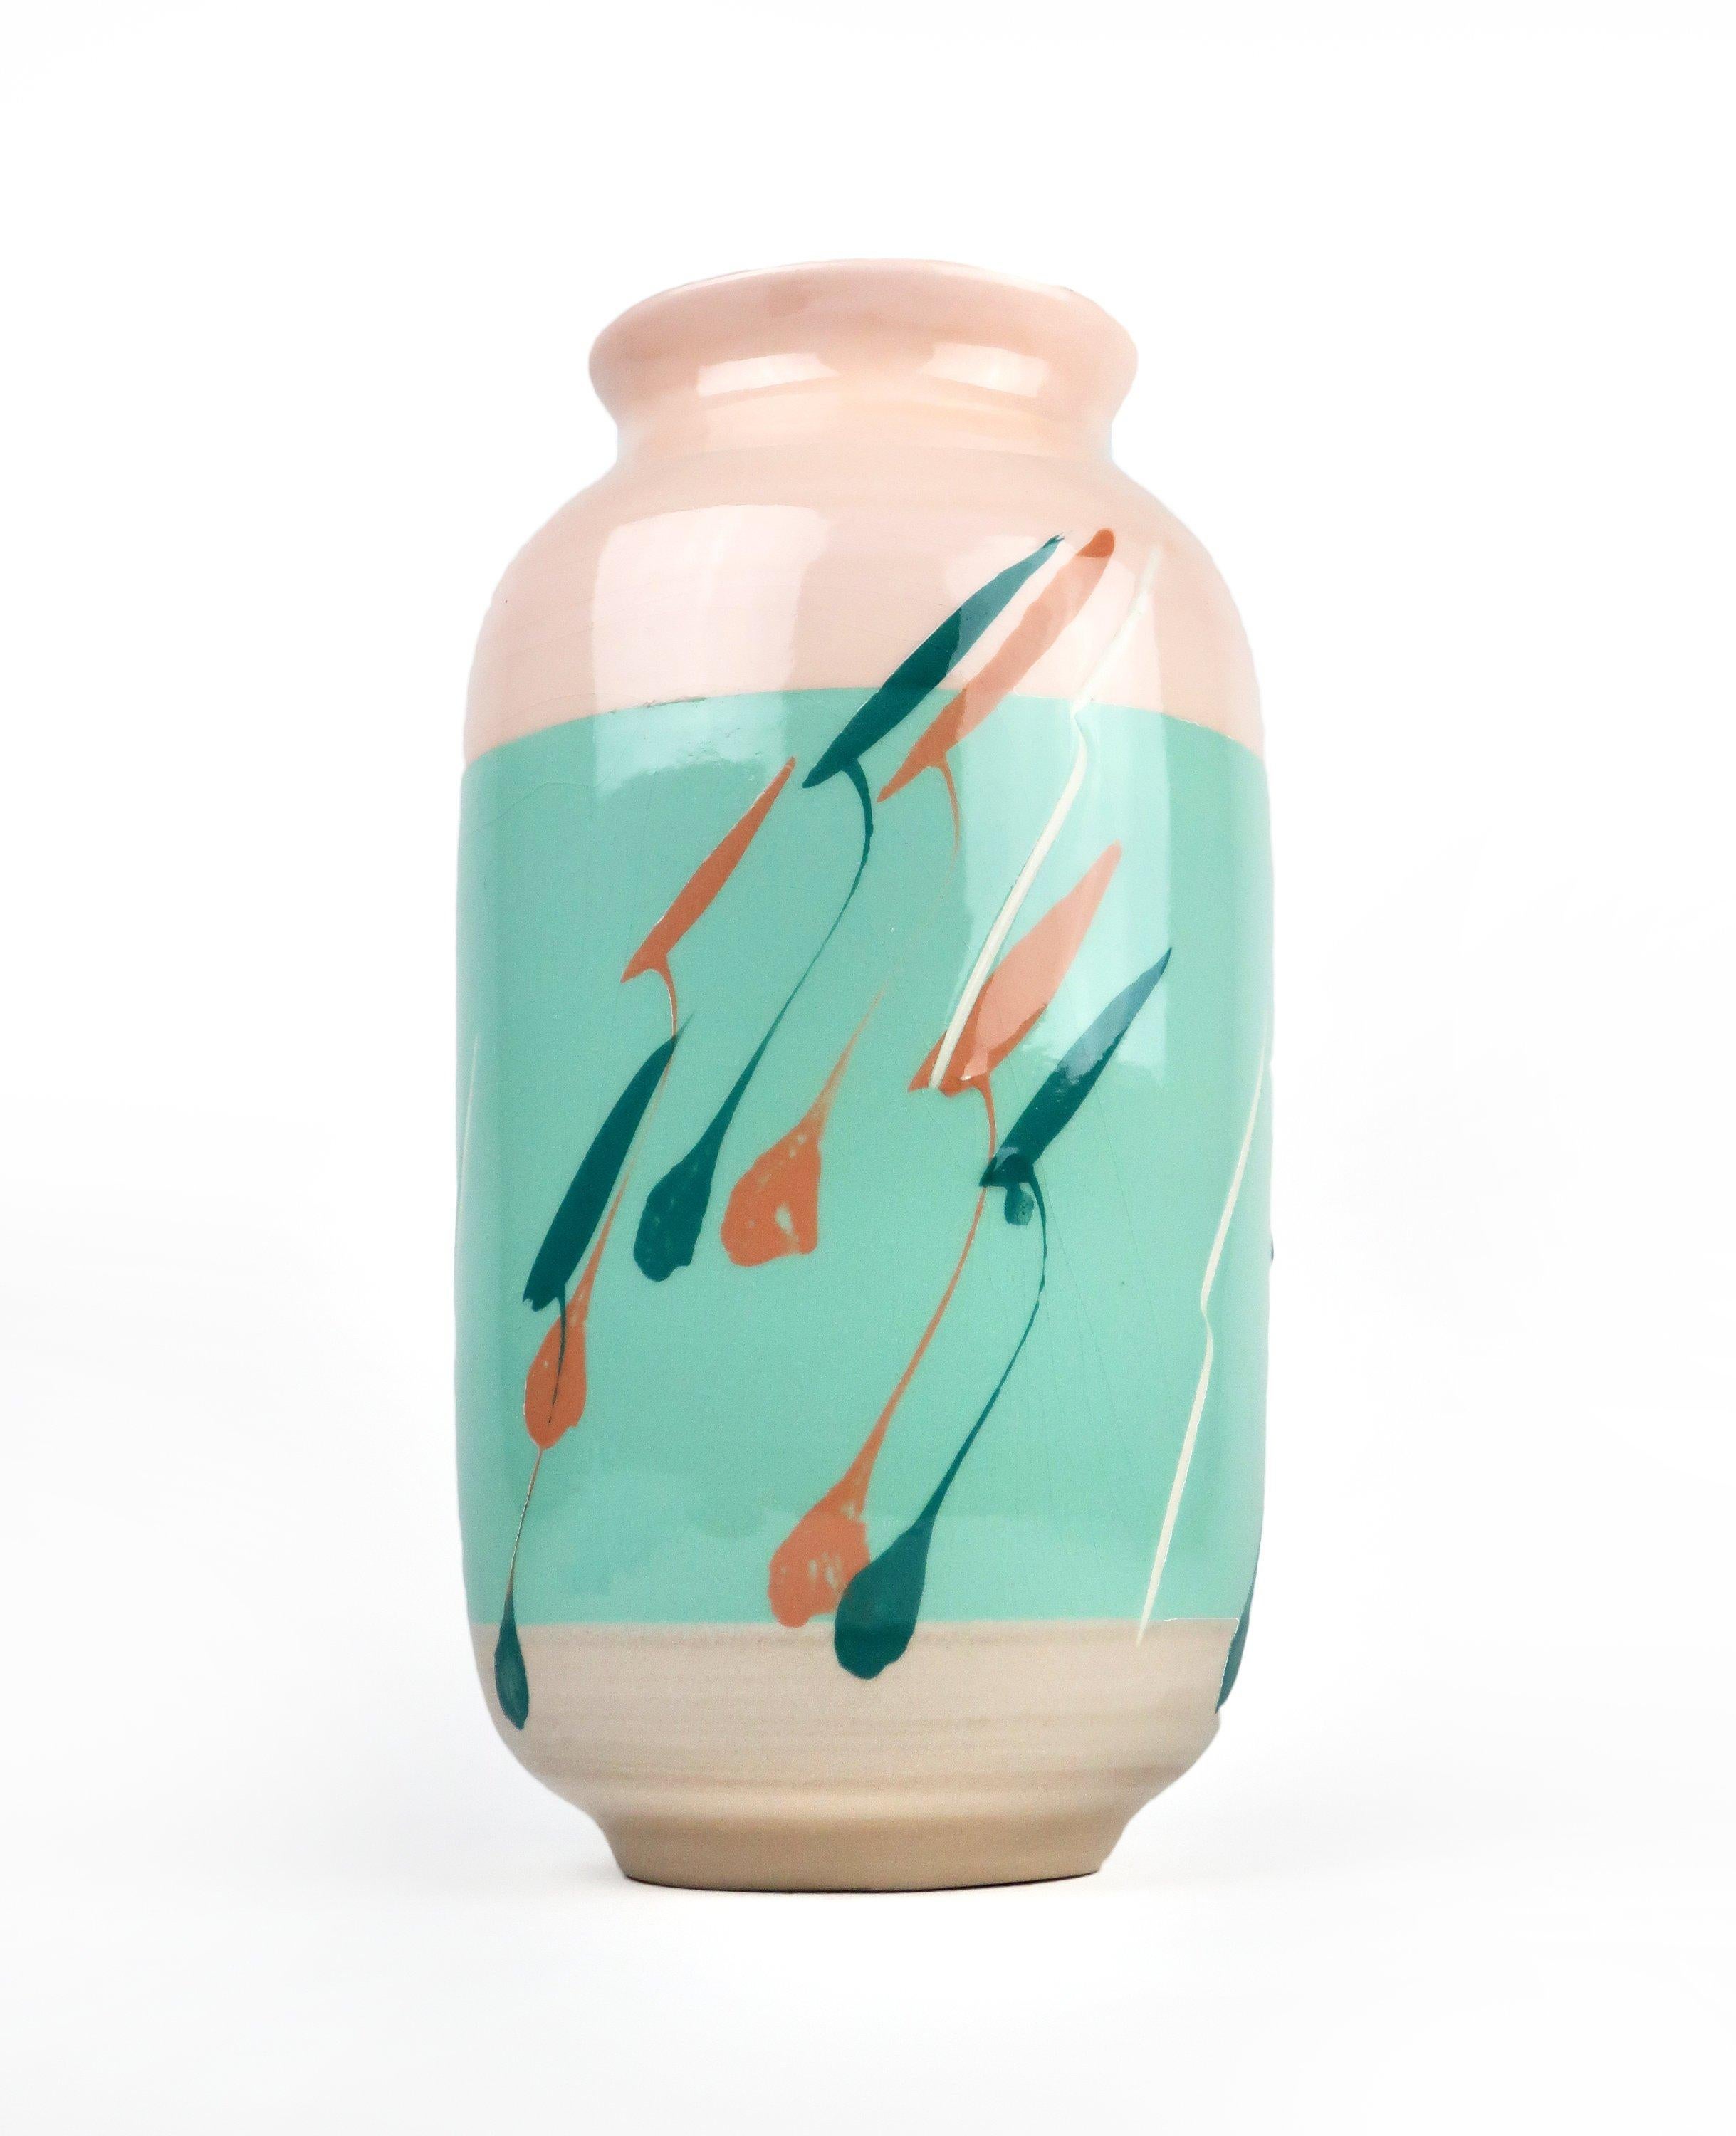 Beautifully hand painted vase in coral and turquoise, with white, green and tan decoration. Sticker on base reads “An Original Design by Vohann of Calif, Inc.”

Excellent vintage condition with light shelf wear.

Measures: 6